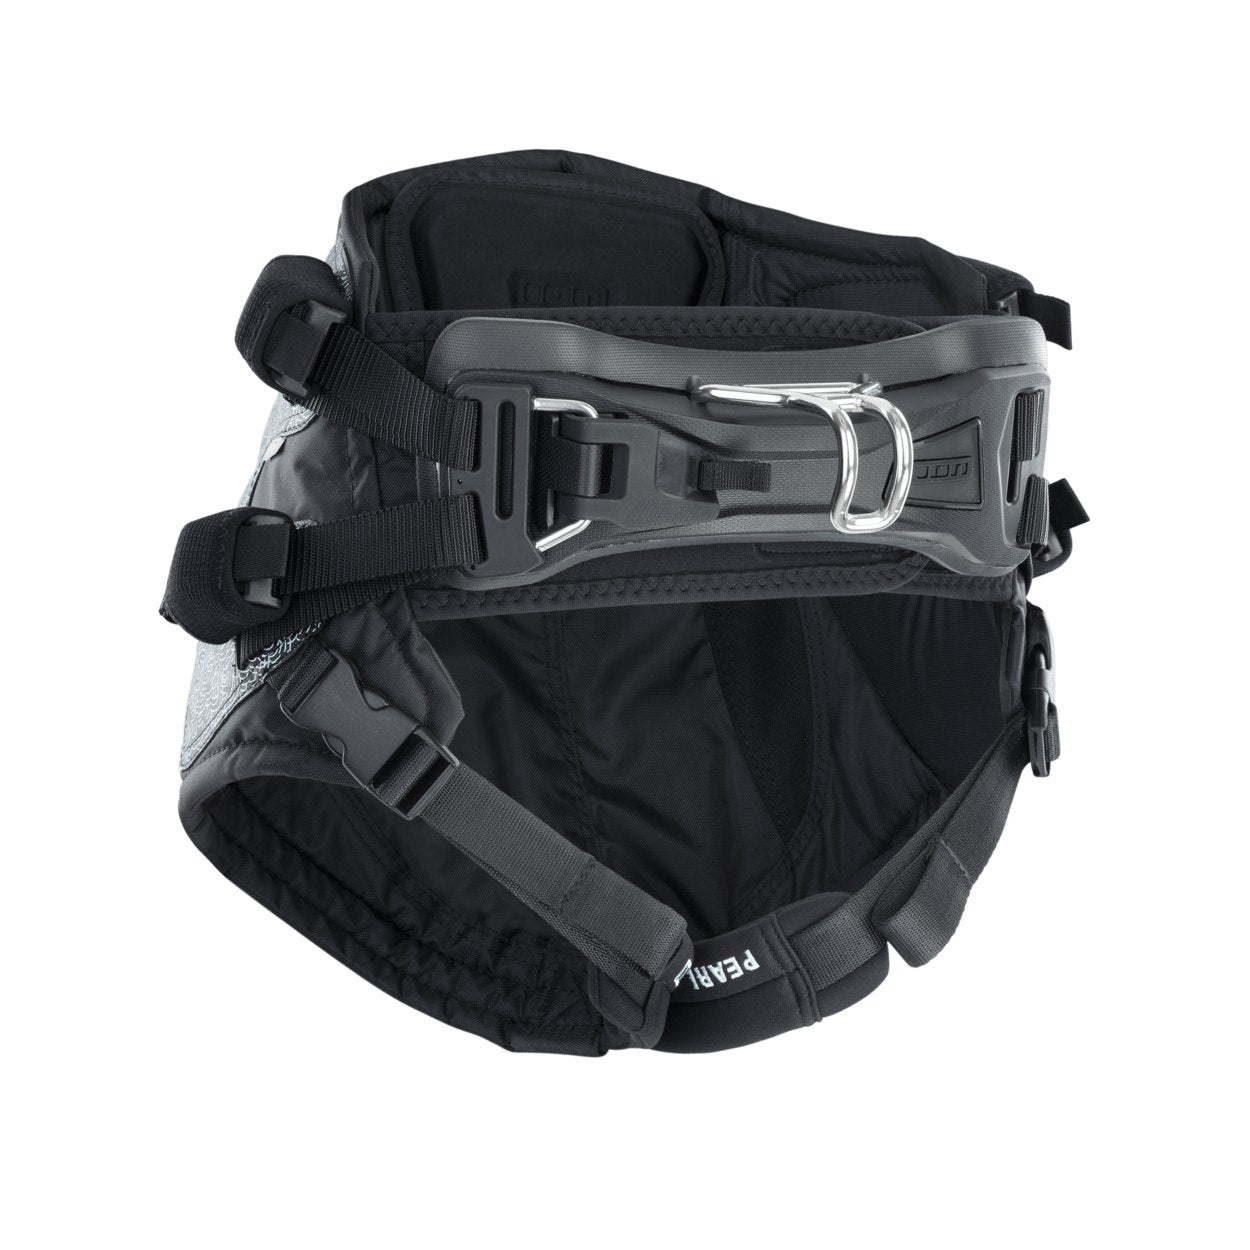 ION Pearl Windsurf Seat Harness Men 2022 - Worthing Watersports - 9008415943128 - Harness - ION Water